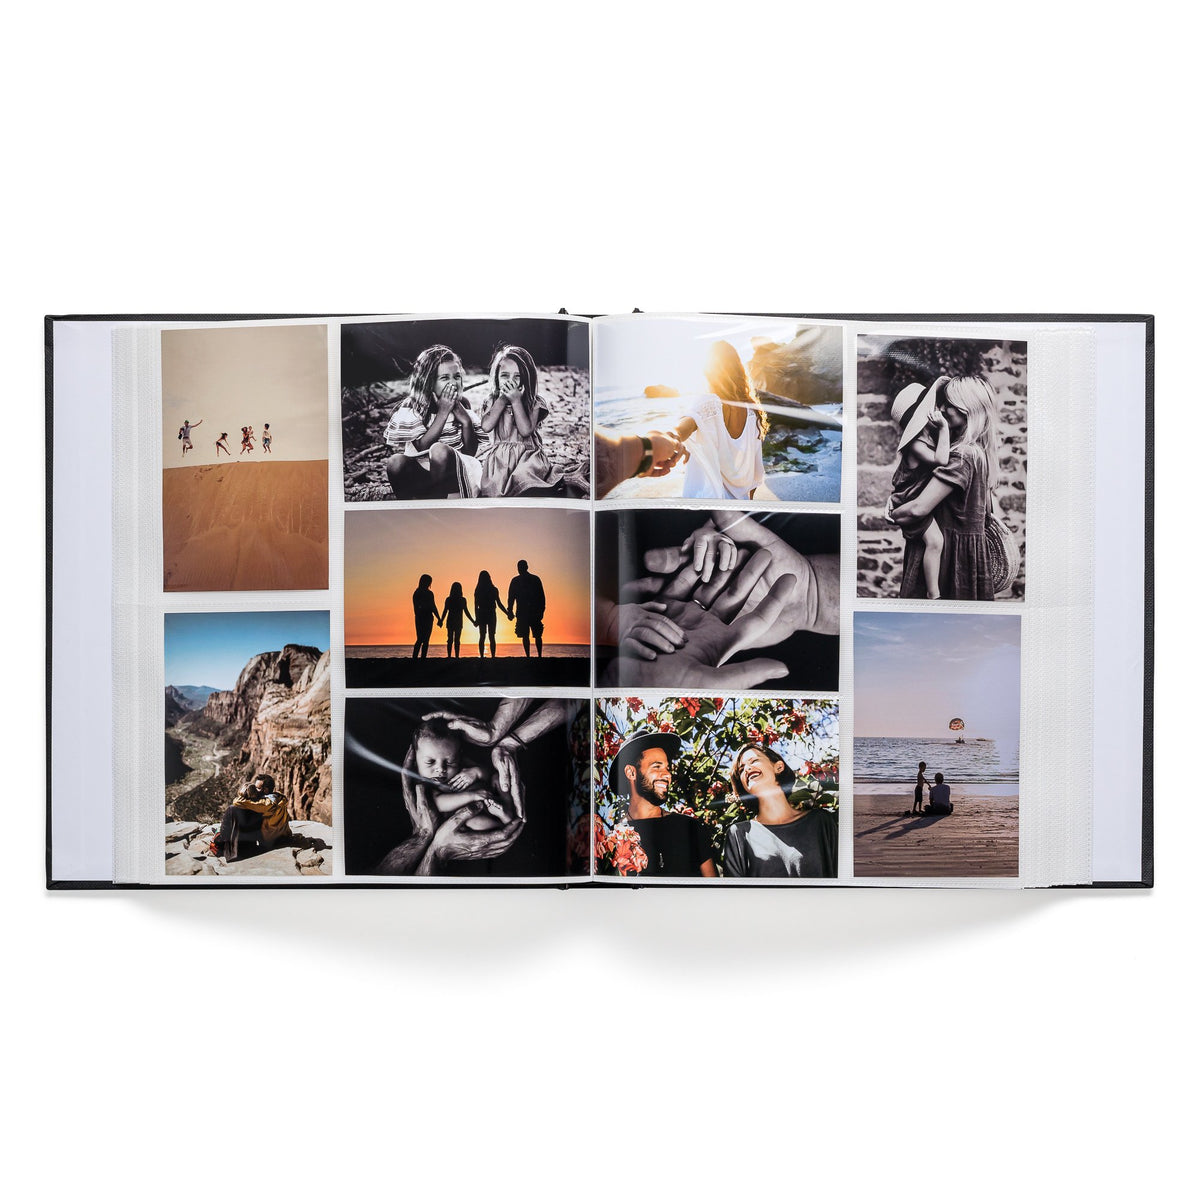 La Lente - Exquisite Handcrafted Leather Photo Books and Albums – Tagged  large scrapbook with acid free blank pages